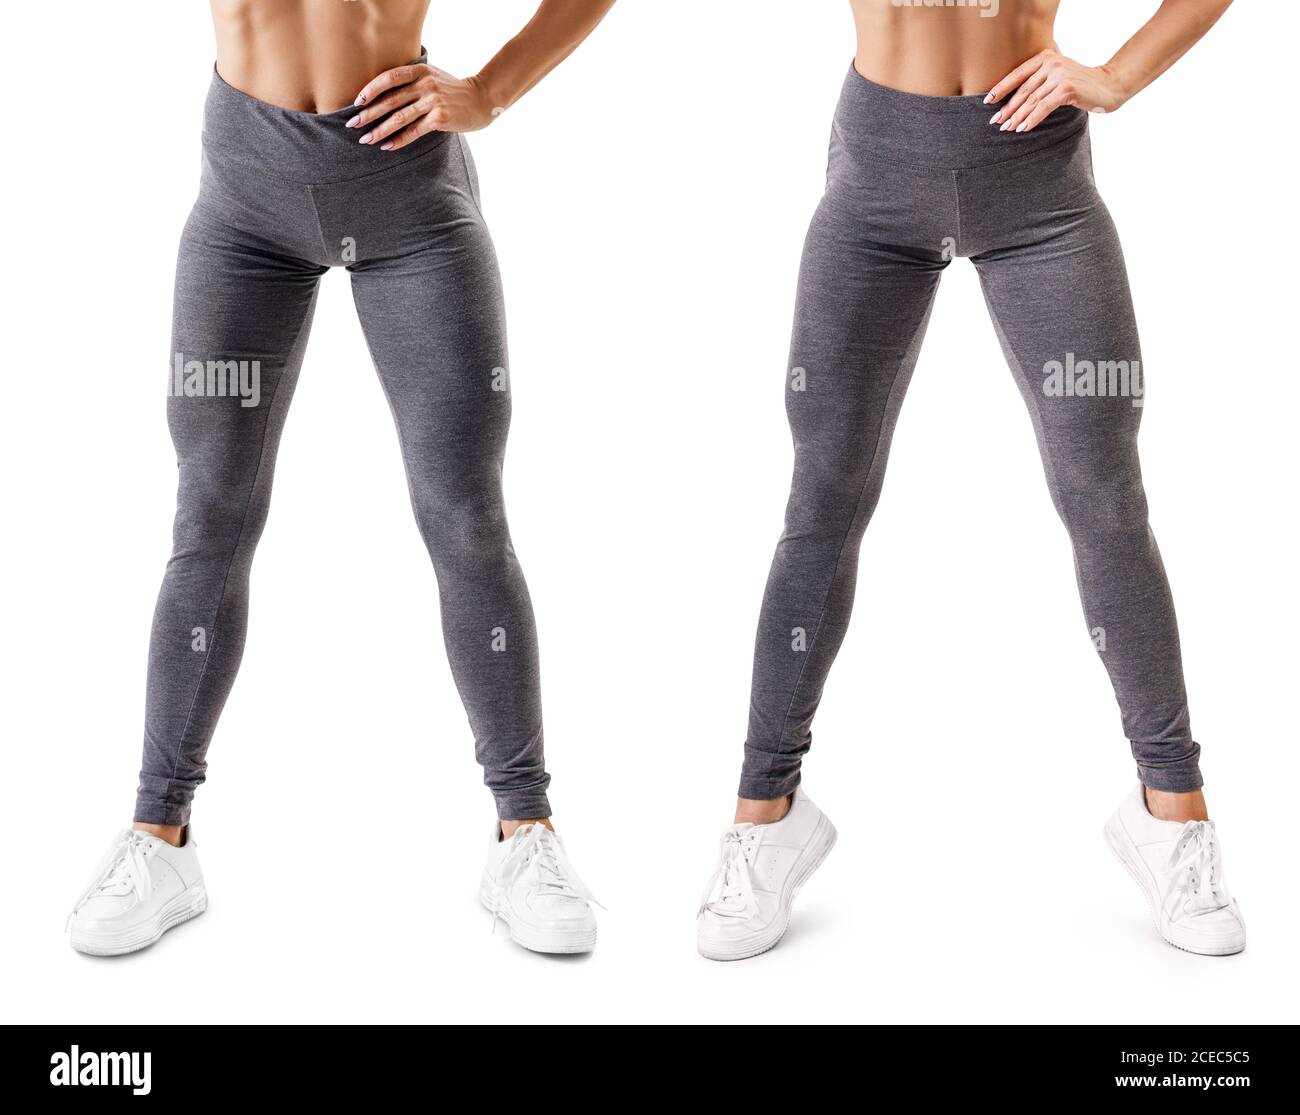 Workout in the gym. Woman's muscular legs in leggings and sneakers Stock Photo